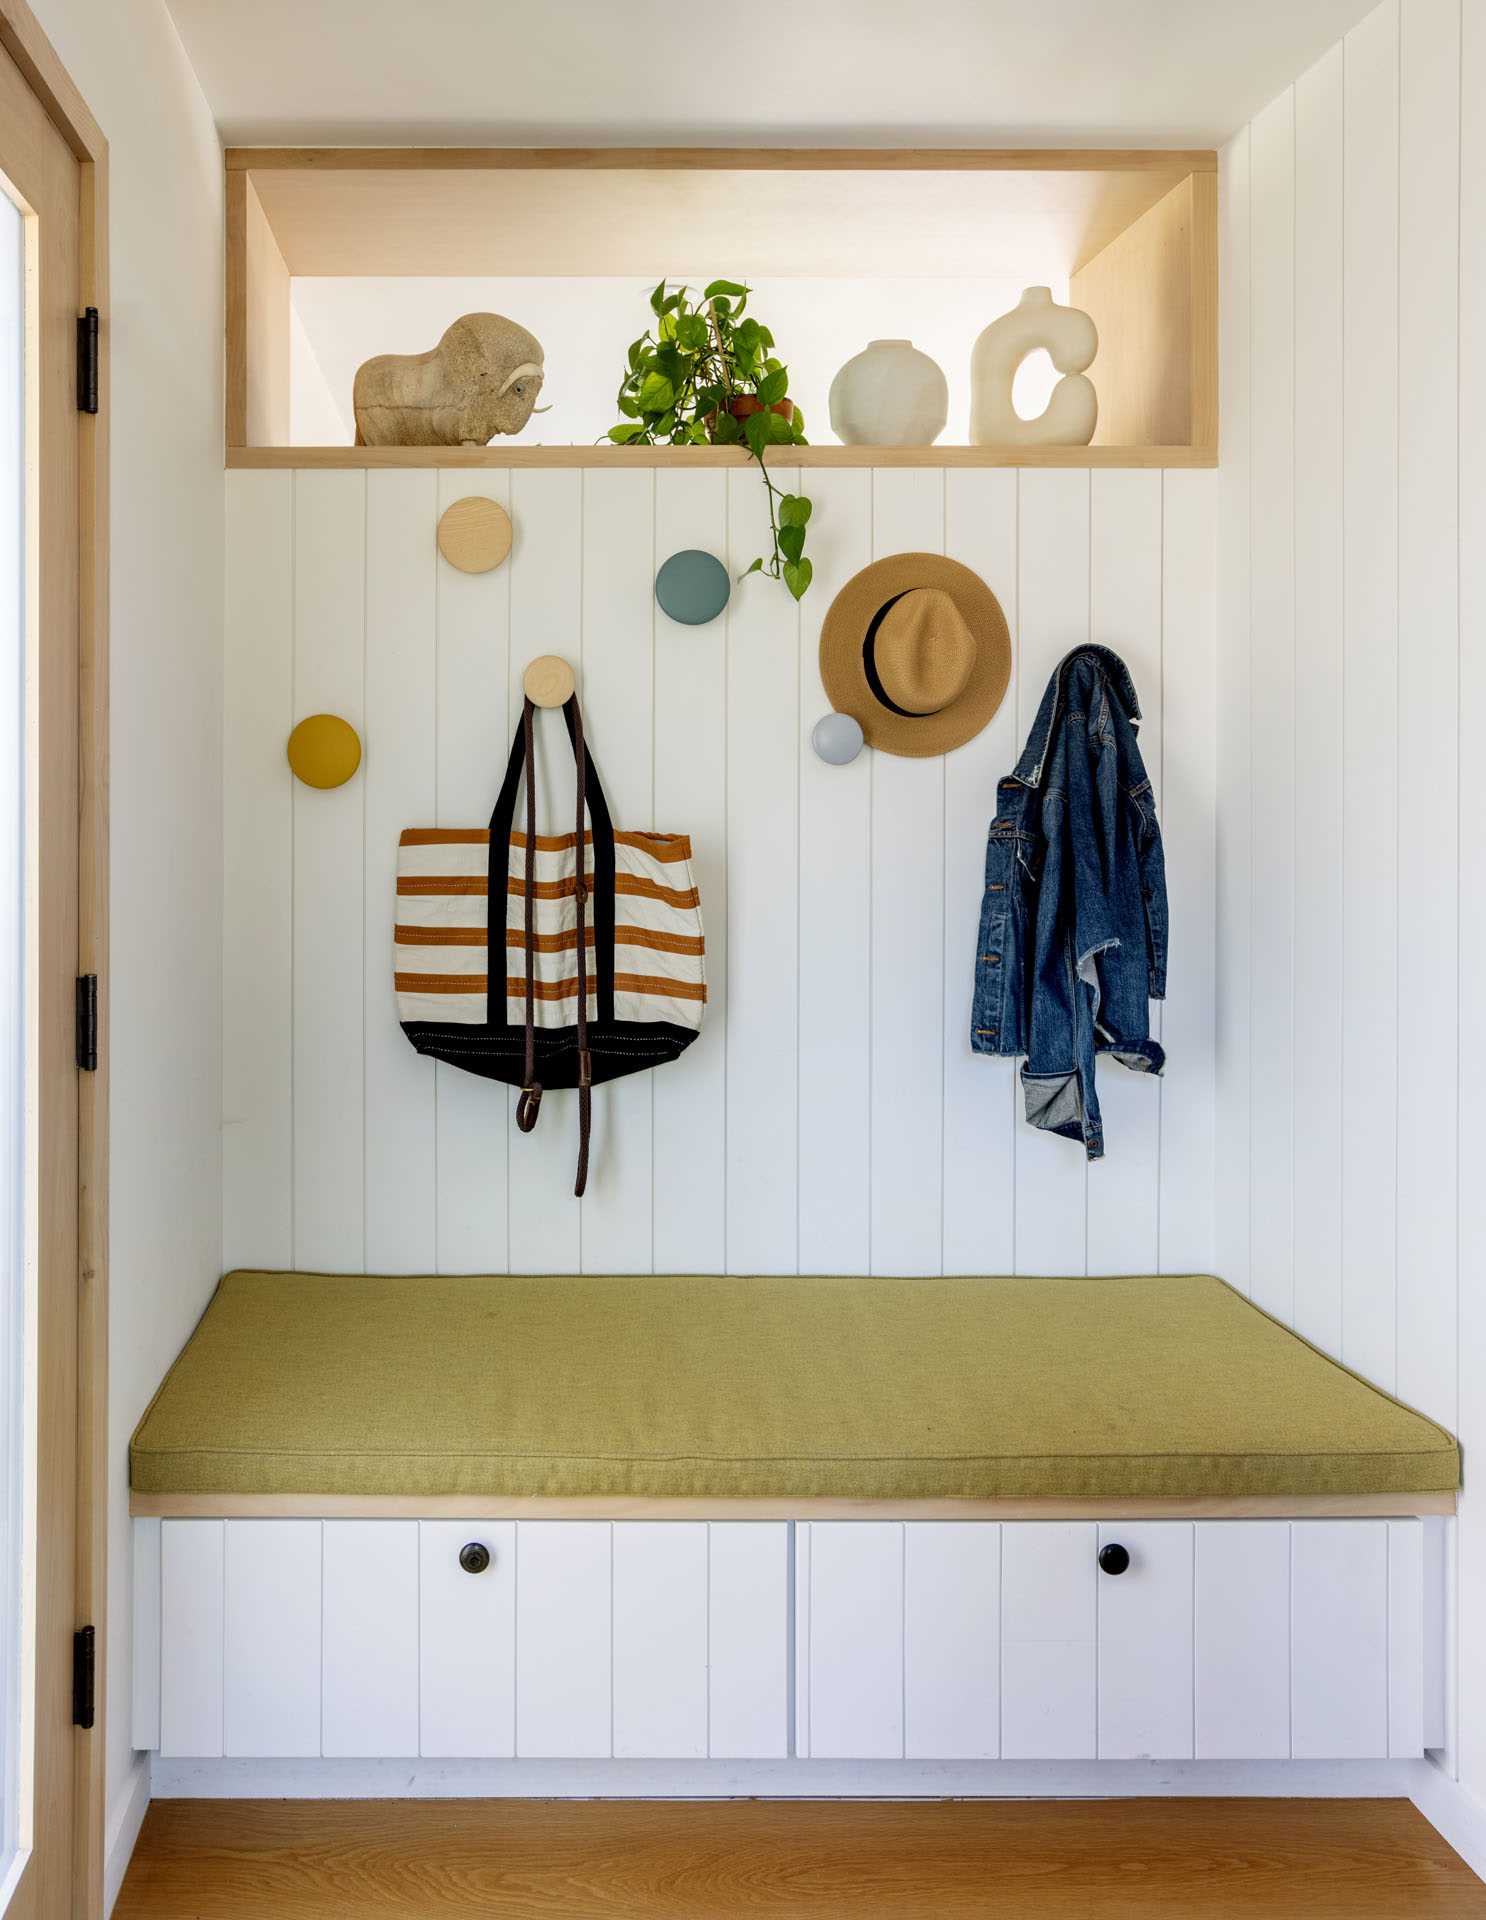 An entryway with a built-in bench and wall hooks.